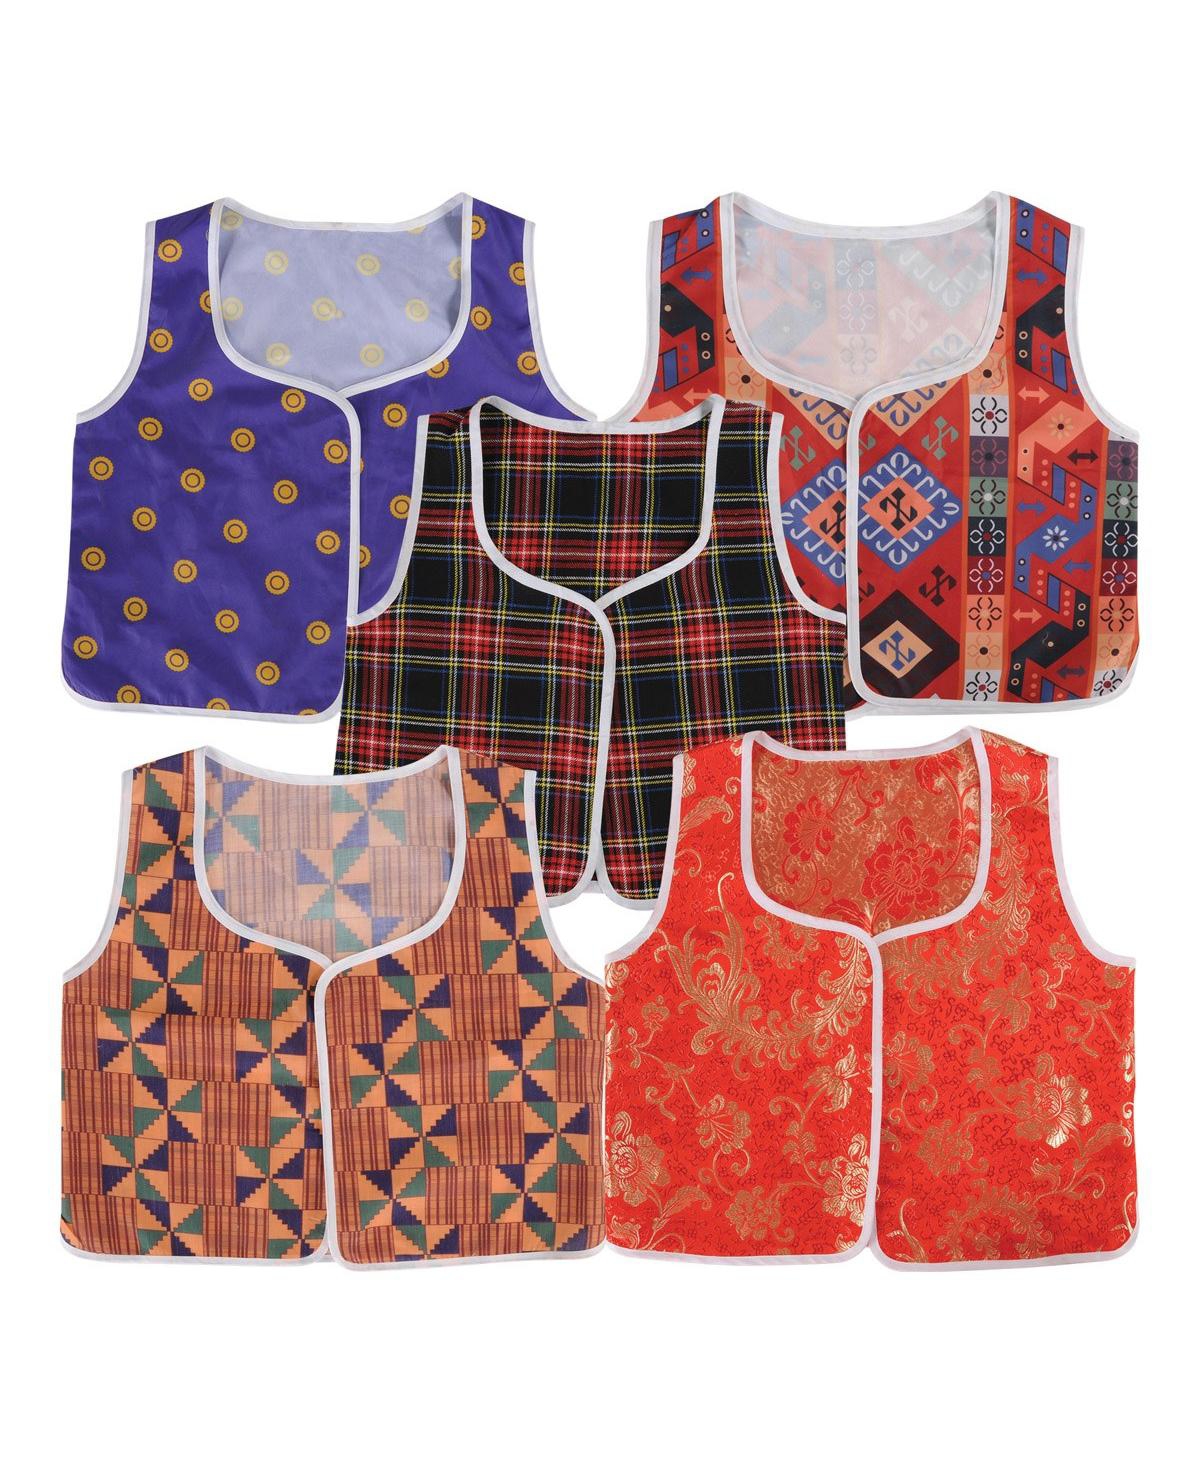 Kaplan Early Learning Babies' Toddler Multicultural Vests In Multicolored